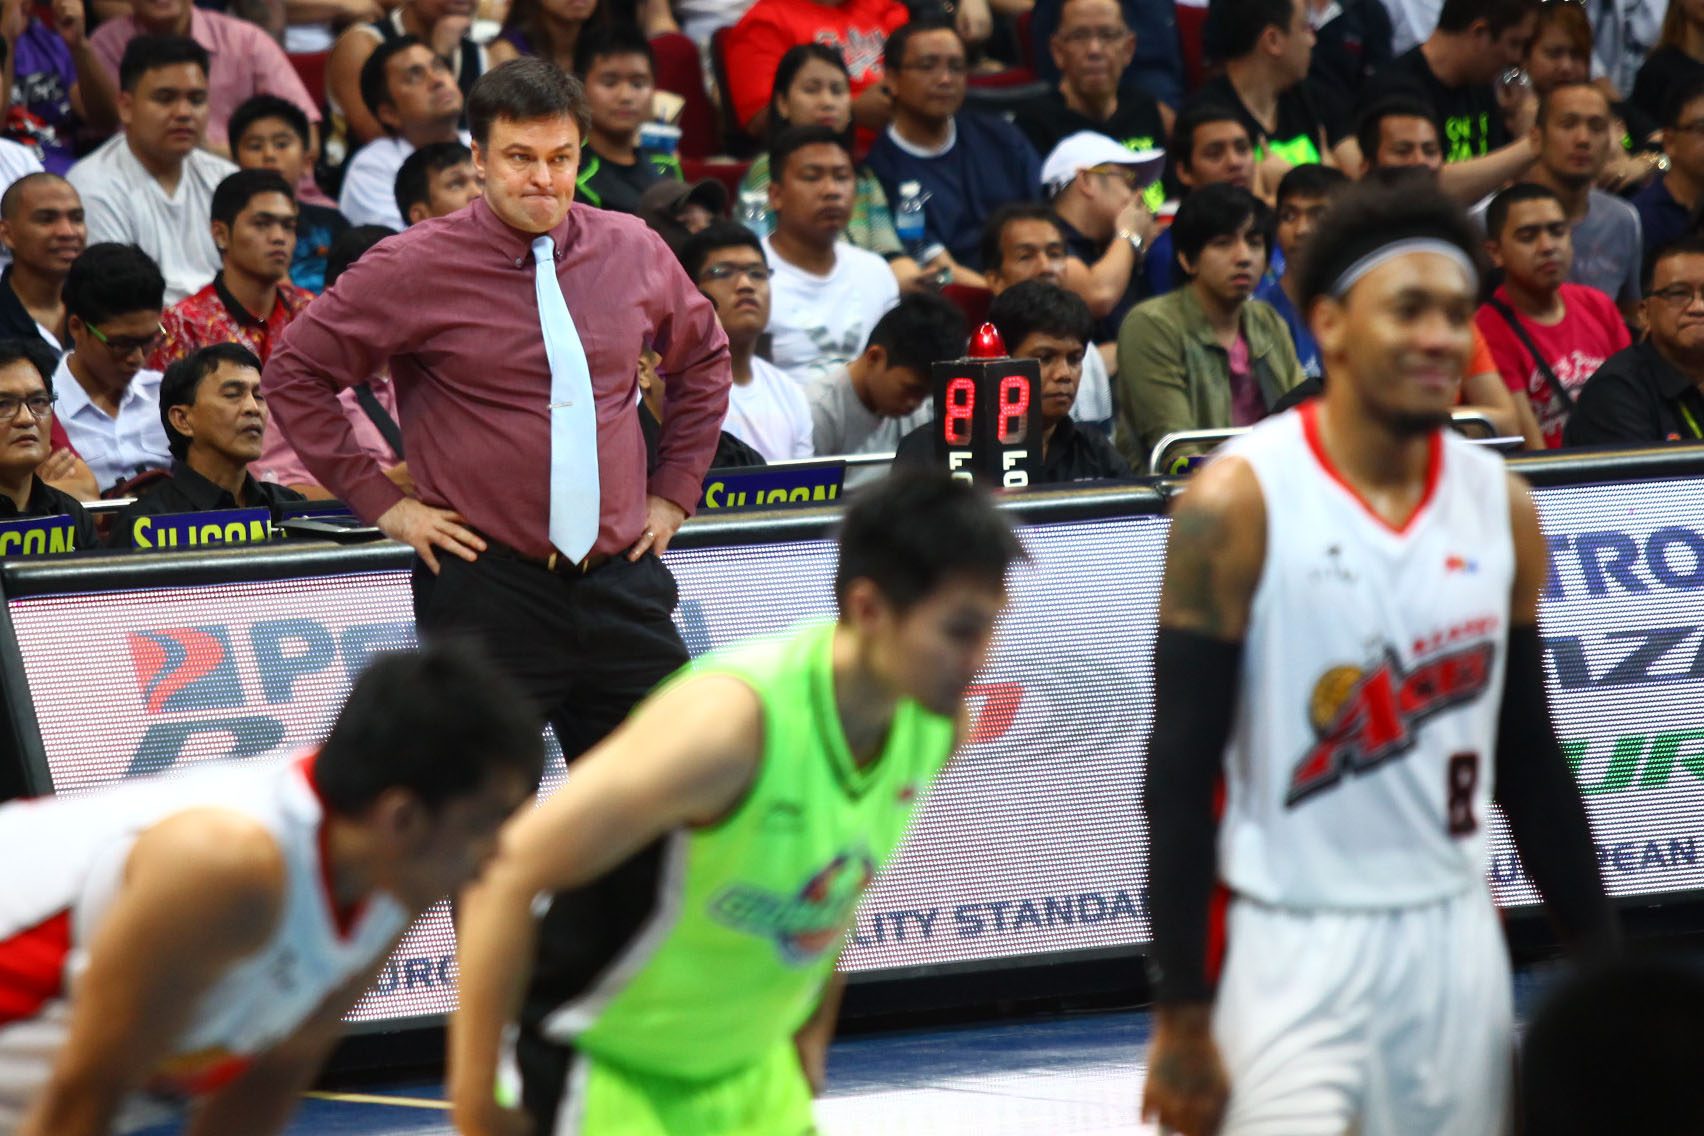 Alaska defense needs to be better for semis Game 2 – Compton